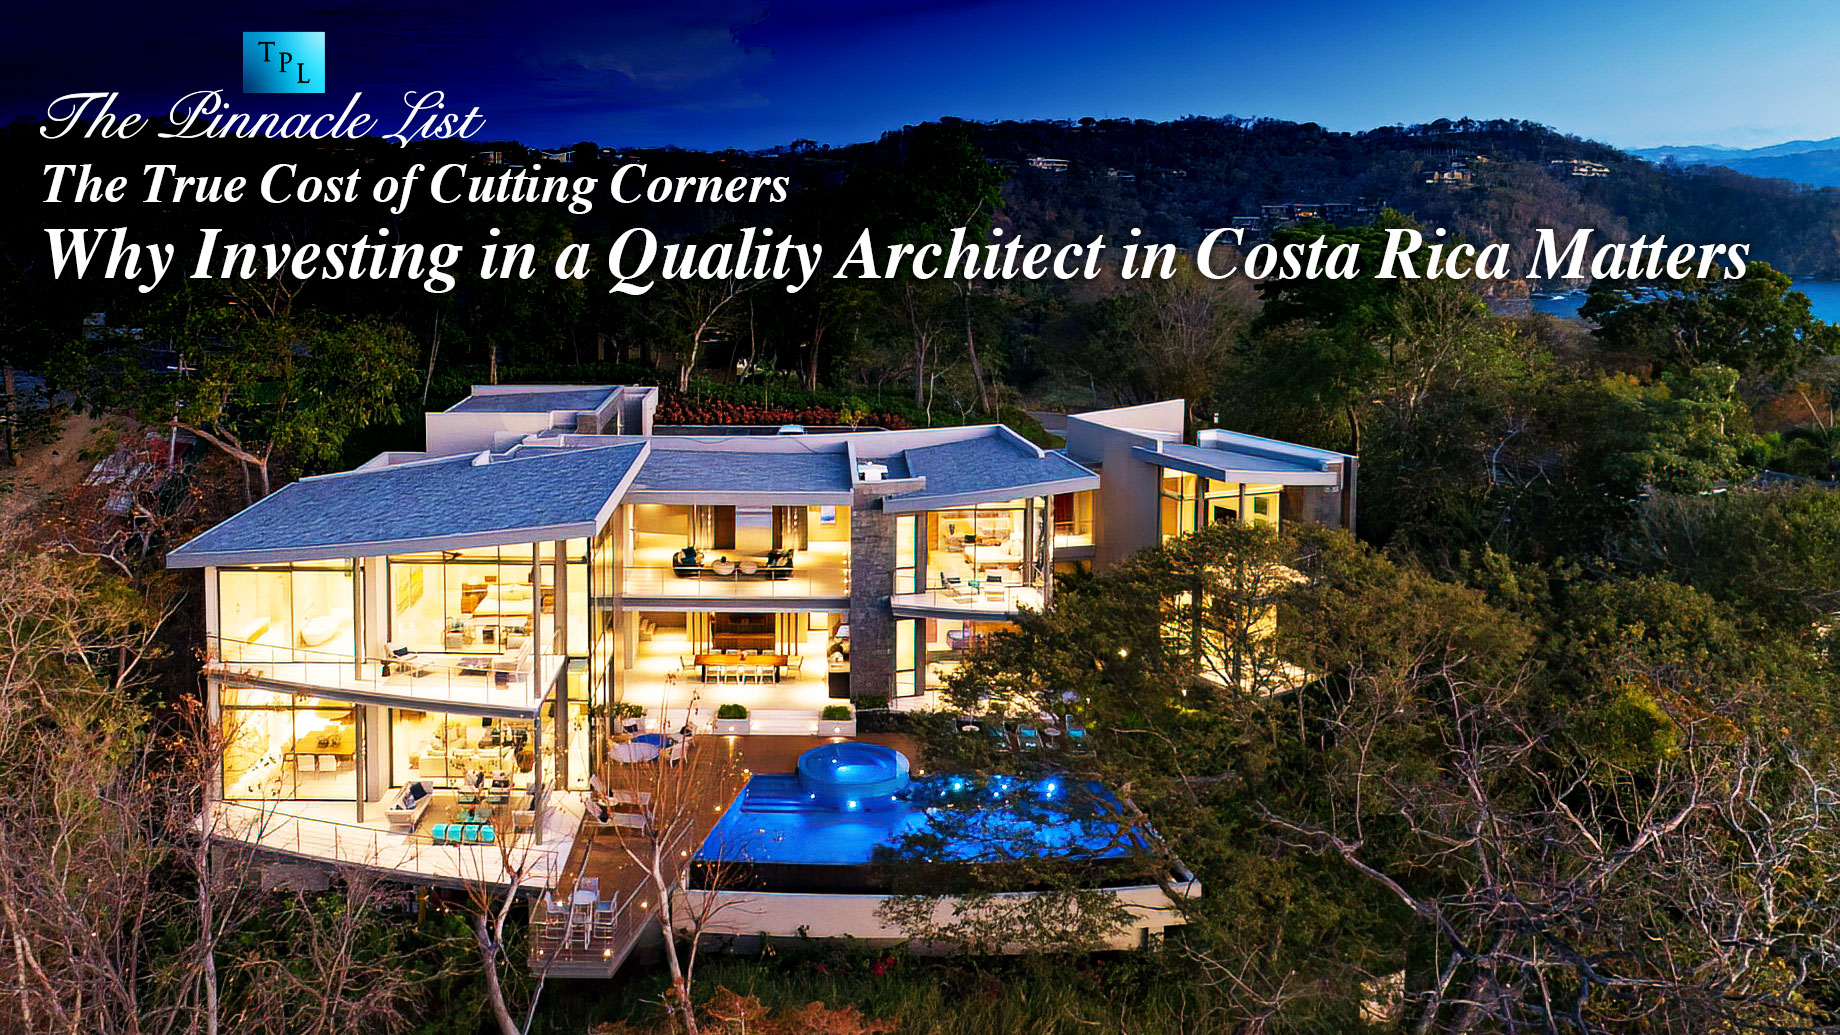 The True Cost of Cutting Corners: Why Investing in a Quality Architect in Costa Rica Matters